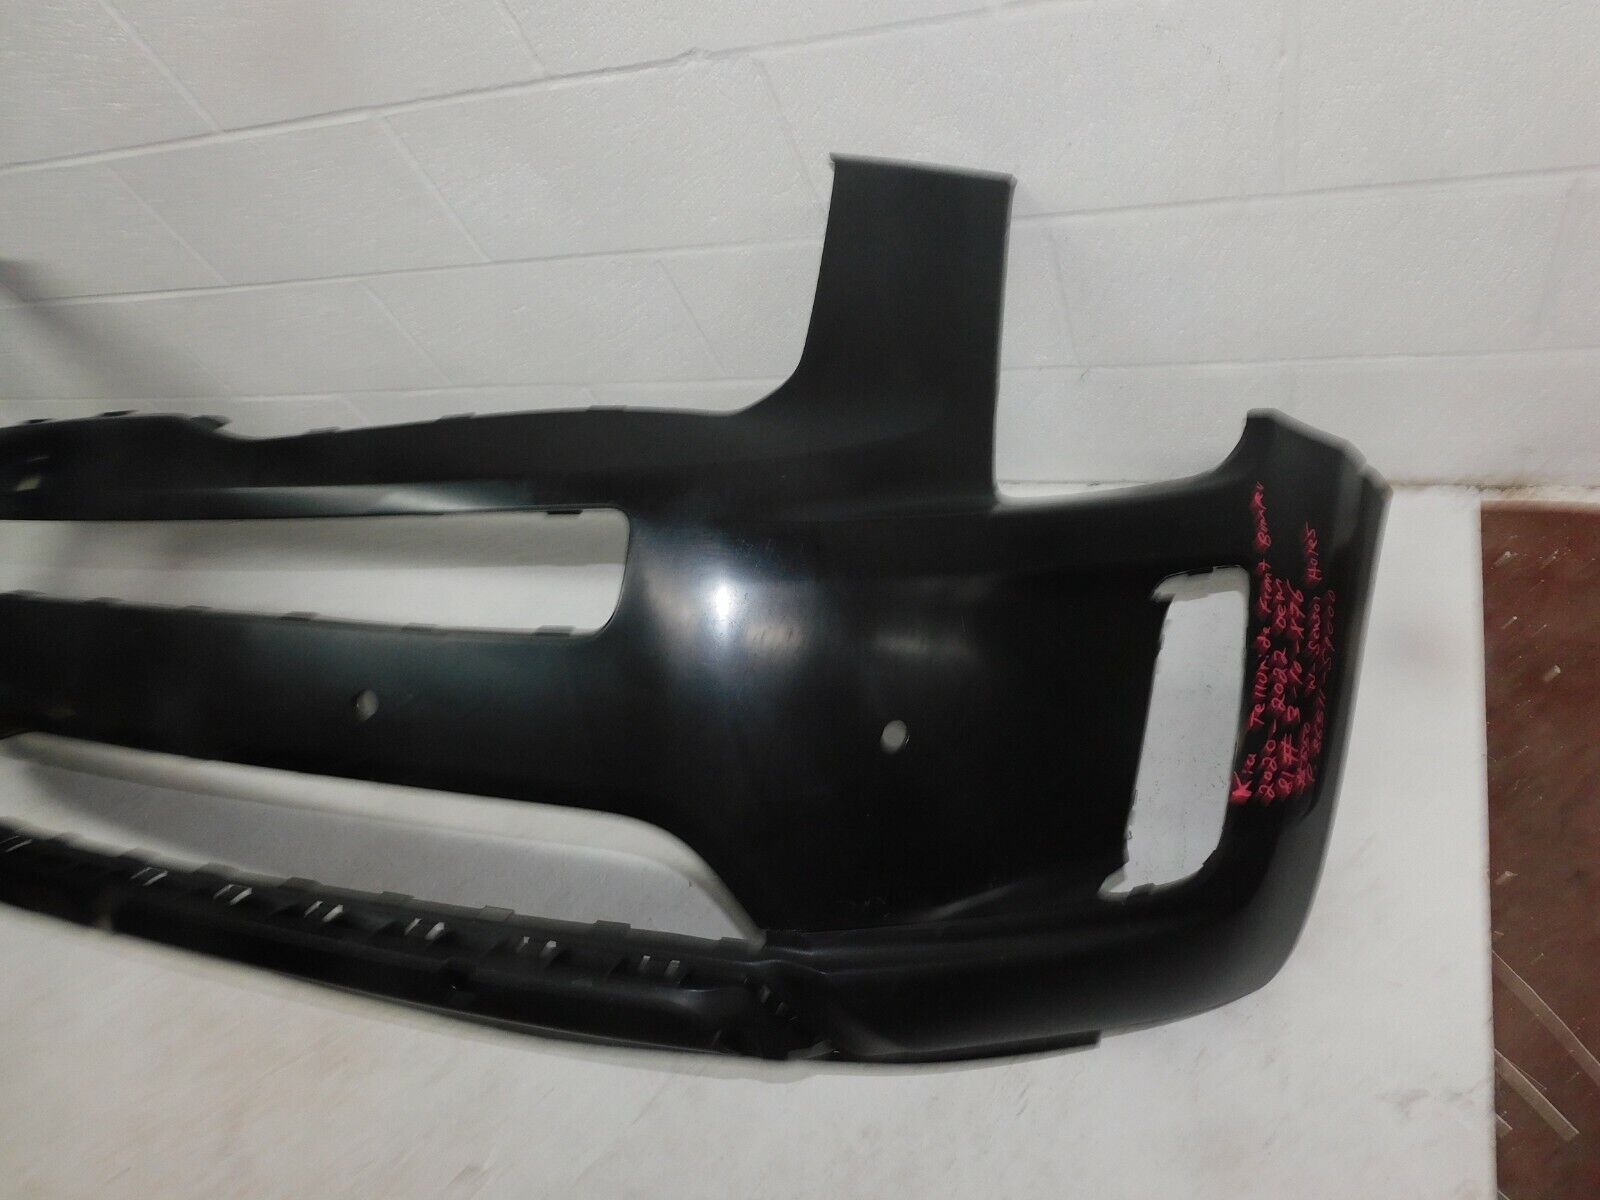 Used 2020 2022 Kia Telluride Front Bumper Cover Oem With Sensor Holes For Sale 86511 S9000 1199